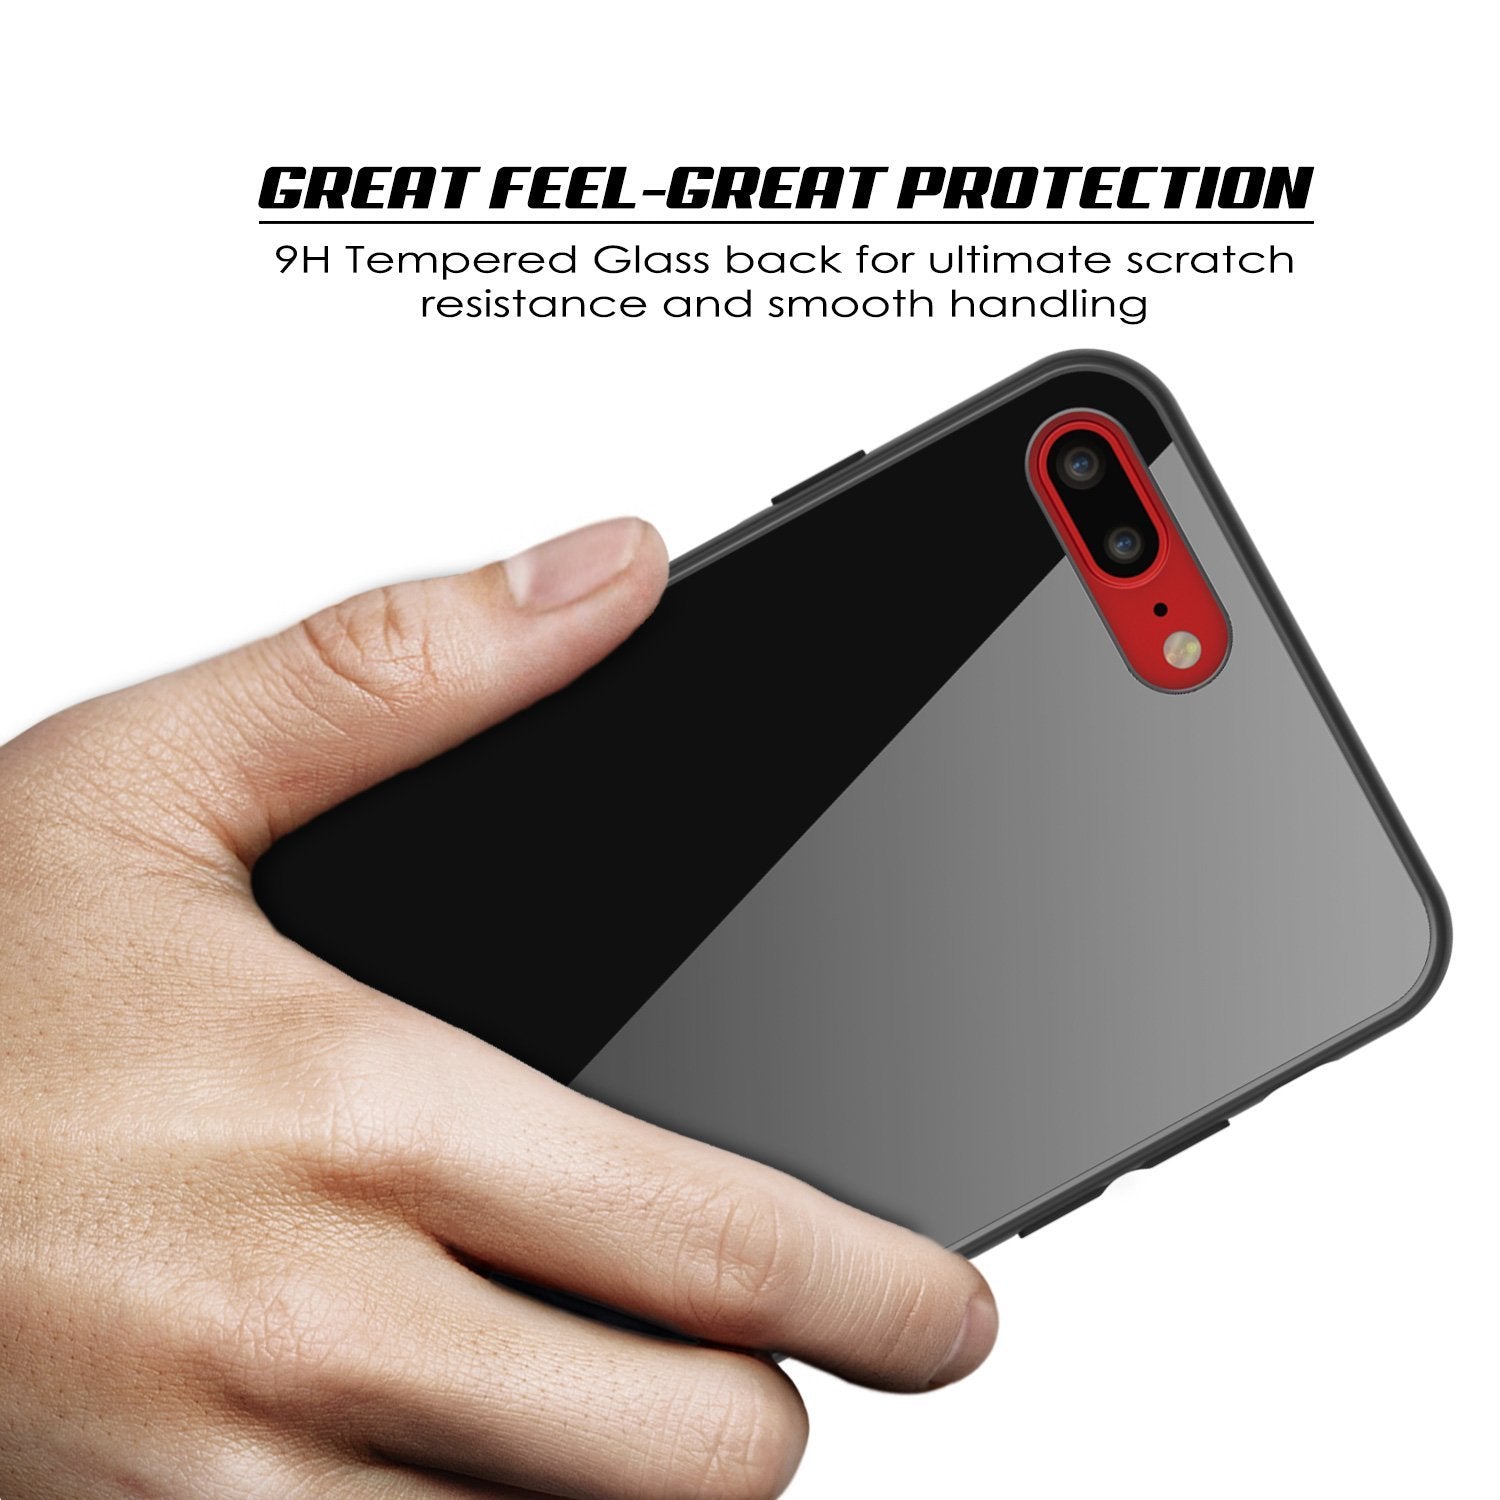 iPhone 8 PLUS Case, Punkcase GlassShield Ultra Thin Protective 9H Full Body Tempered Glass Cover W/ Drop Protection & Non Slip Grip for Apple iPhone 7 PLUS / Apple iPhone 8 PLUS (Black)